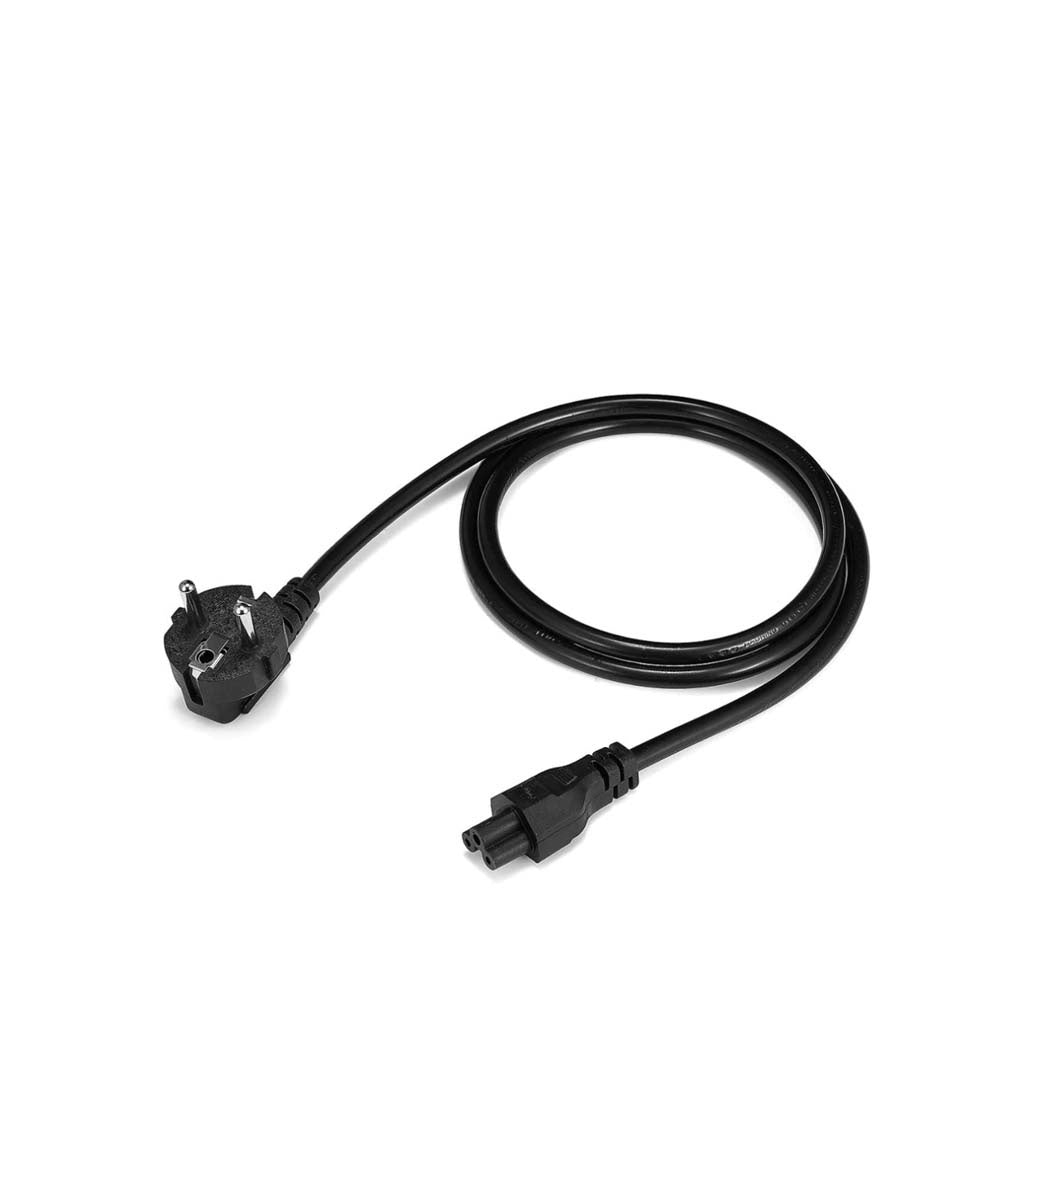 VGEBY Scooter Power Cable, Electric Scooter Power Cable Connection Line for  Ninebot MAX G30/G30D Controller Meter Ninebot Max G30 Segway Ninebot Max